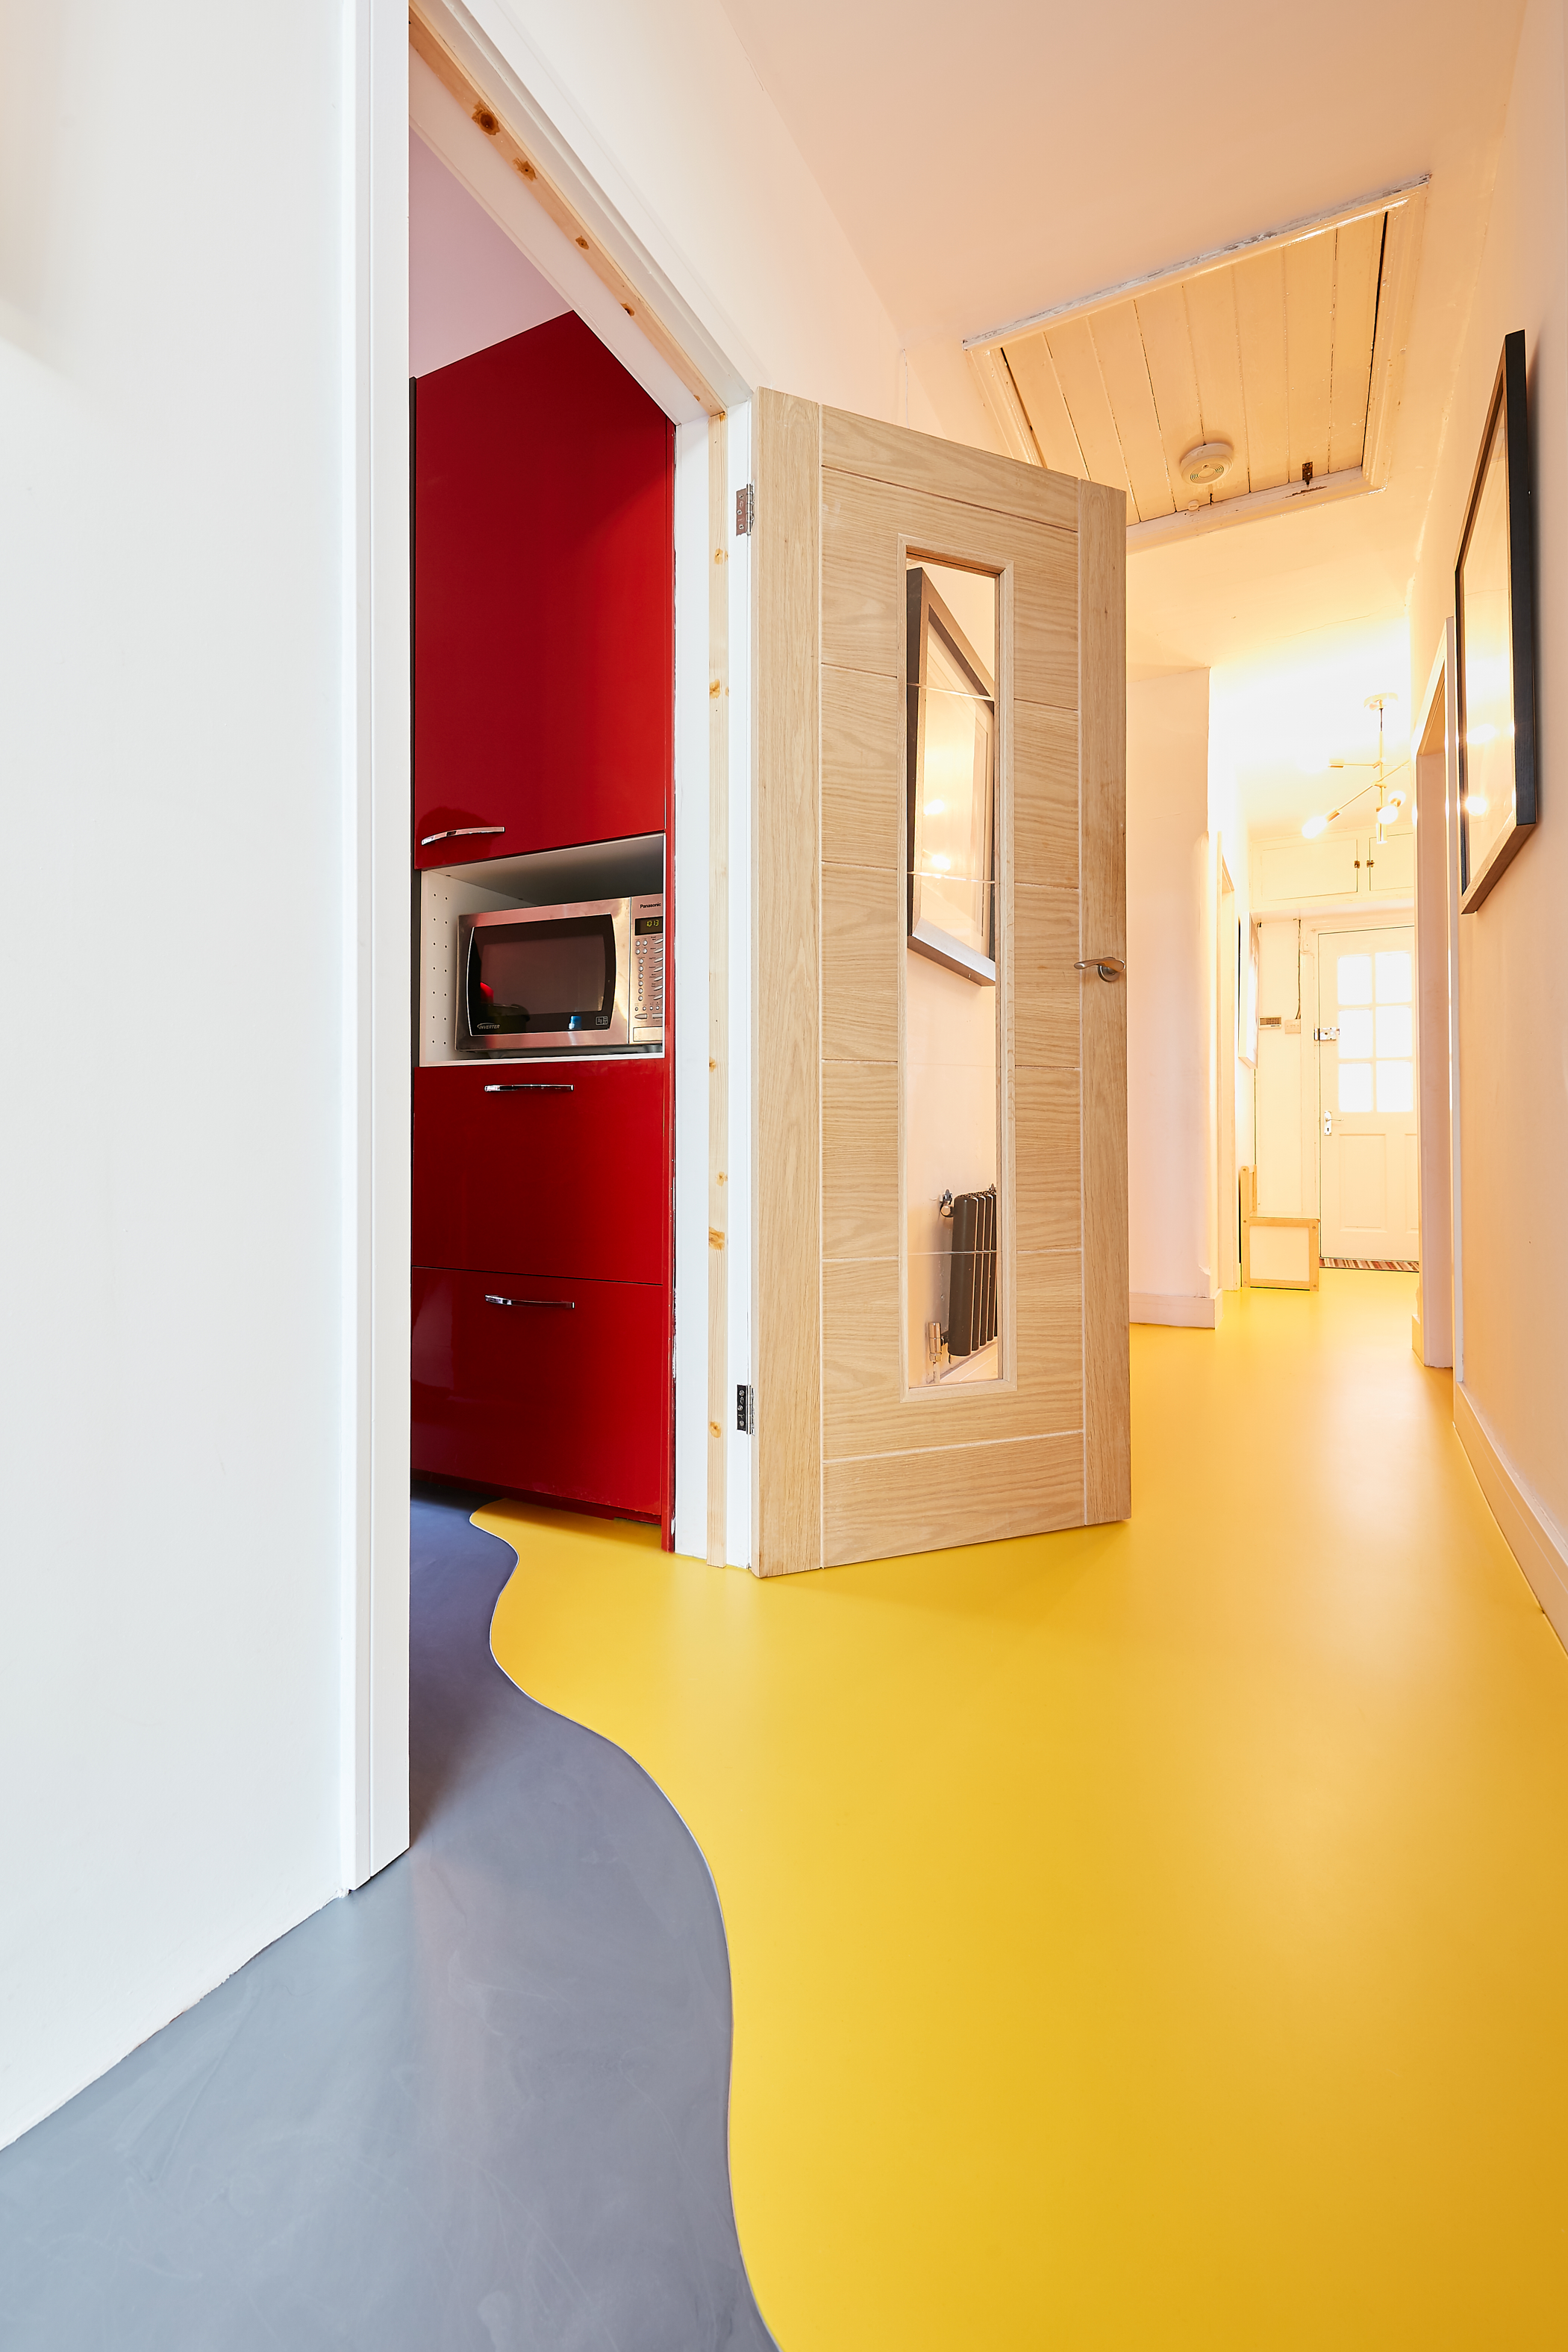 A grey and yellow resin floor in a home with a wavy split between the colours